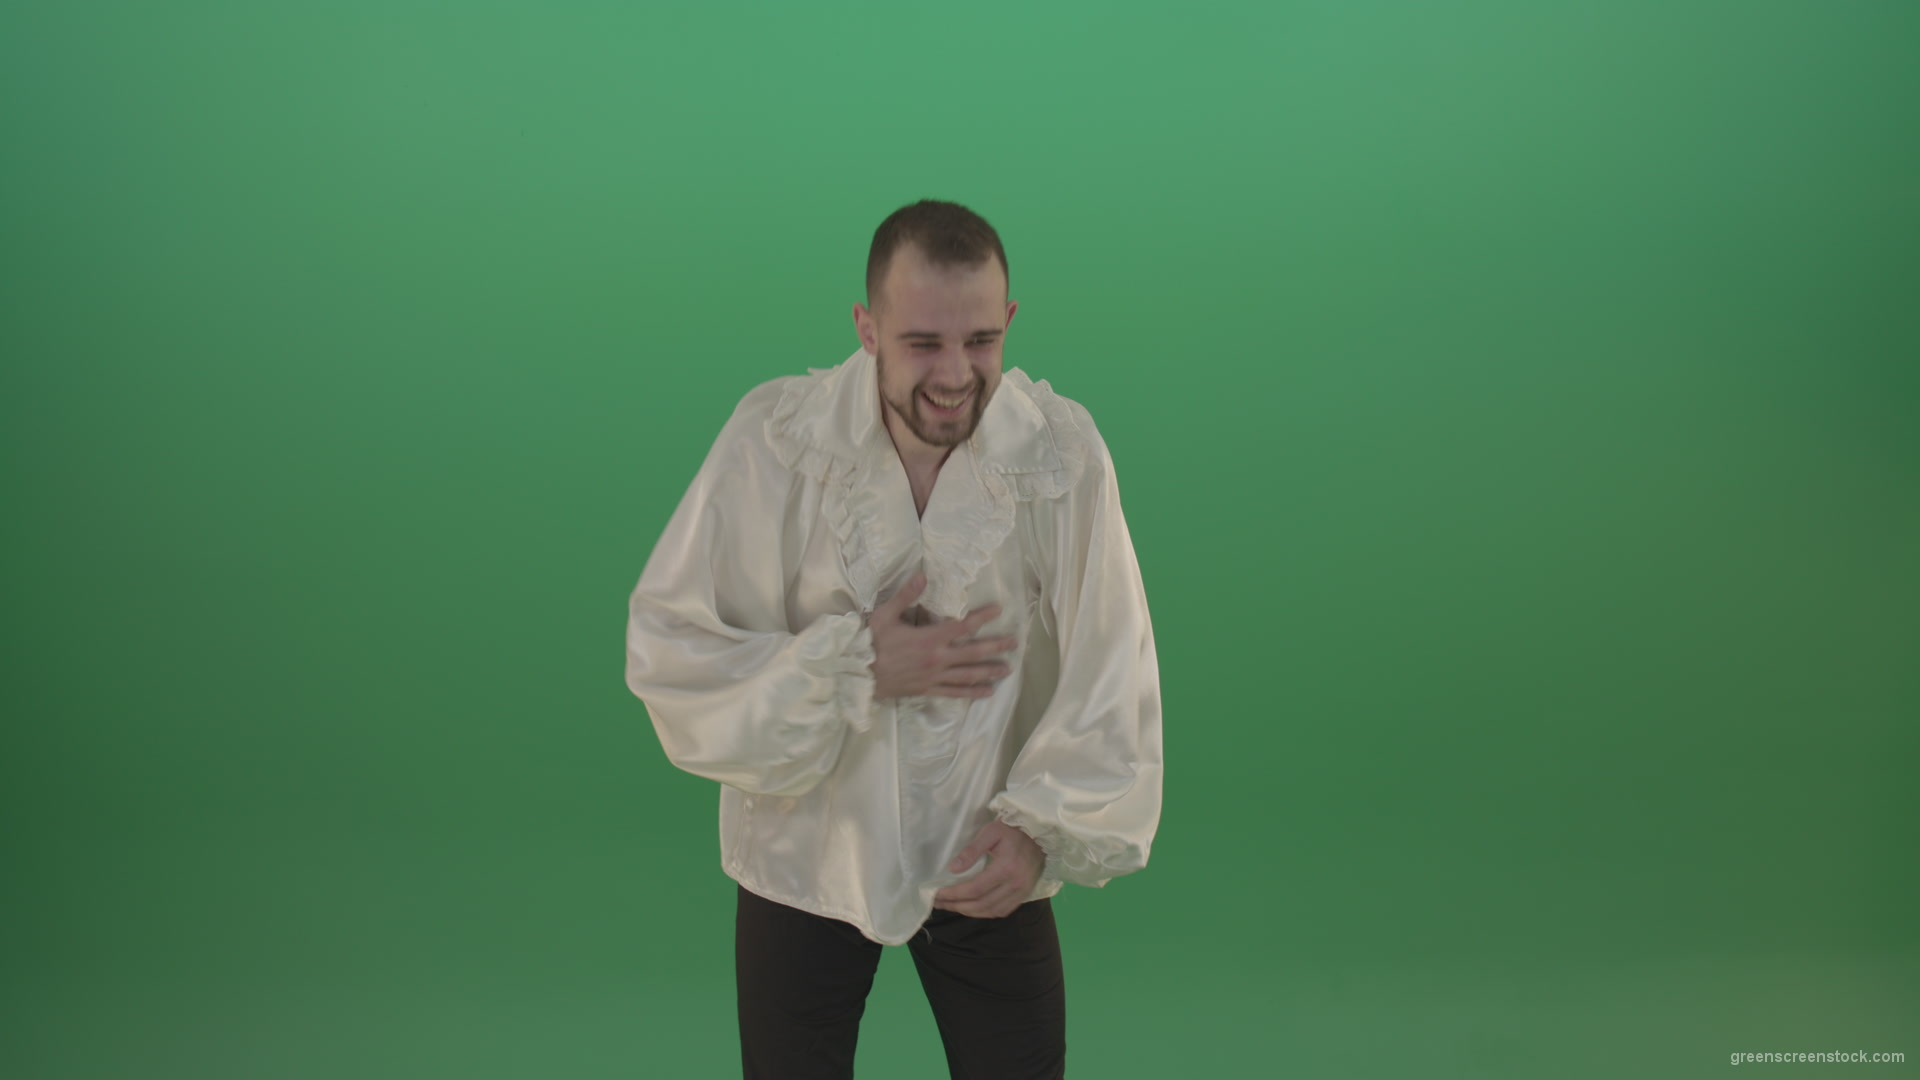 Scarry-laughing-from-the-professional-actor-in-white-shirt-isolated-on-green-screen-background_005 Green Screen Stock